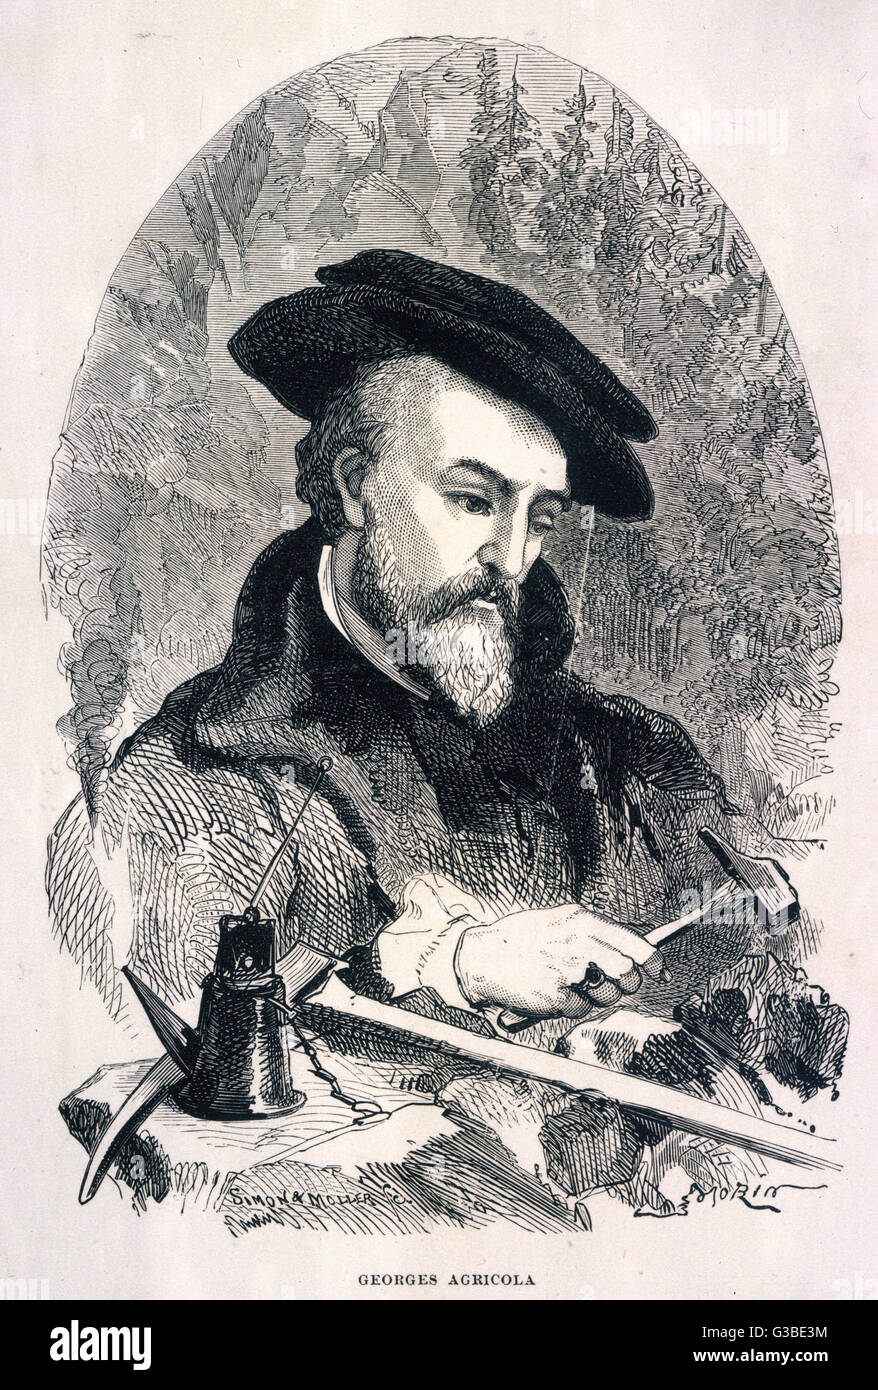 GEORG AGRICOLA BAUER  Considered the father of  mineralogy, basing writings on  observation and enquiry rather  than received opinion.     Date: 1494 - 1555 Stock Photo